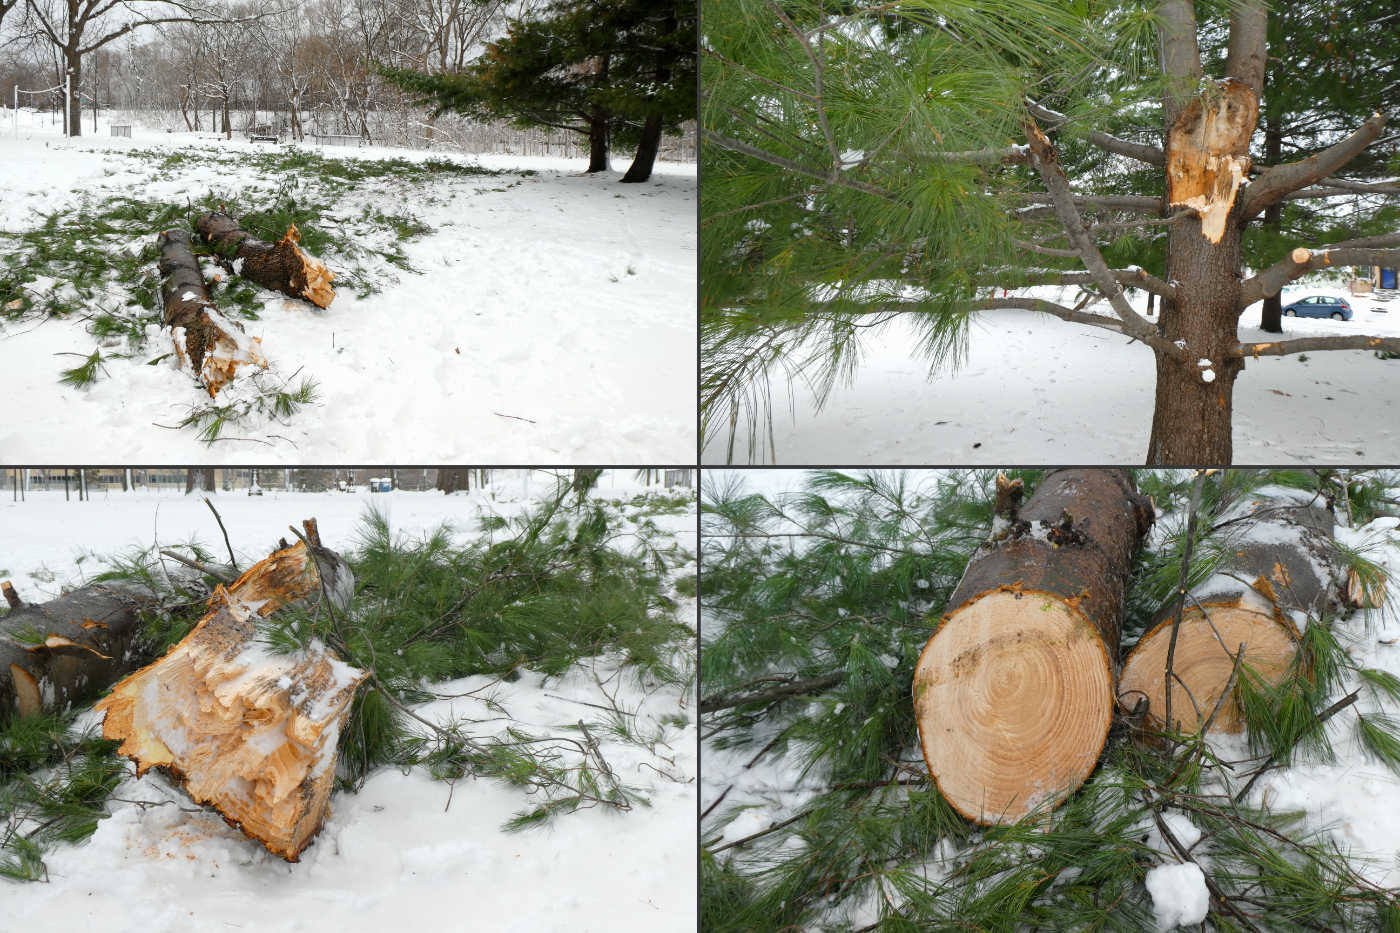 Composite of four photographs showing views of pine tree trunks broken and sawed in the snow surrounded by scattered pine branches and pine needles in the snow.